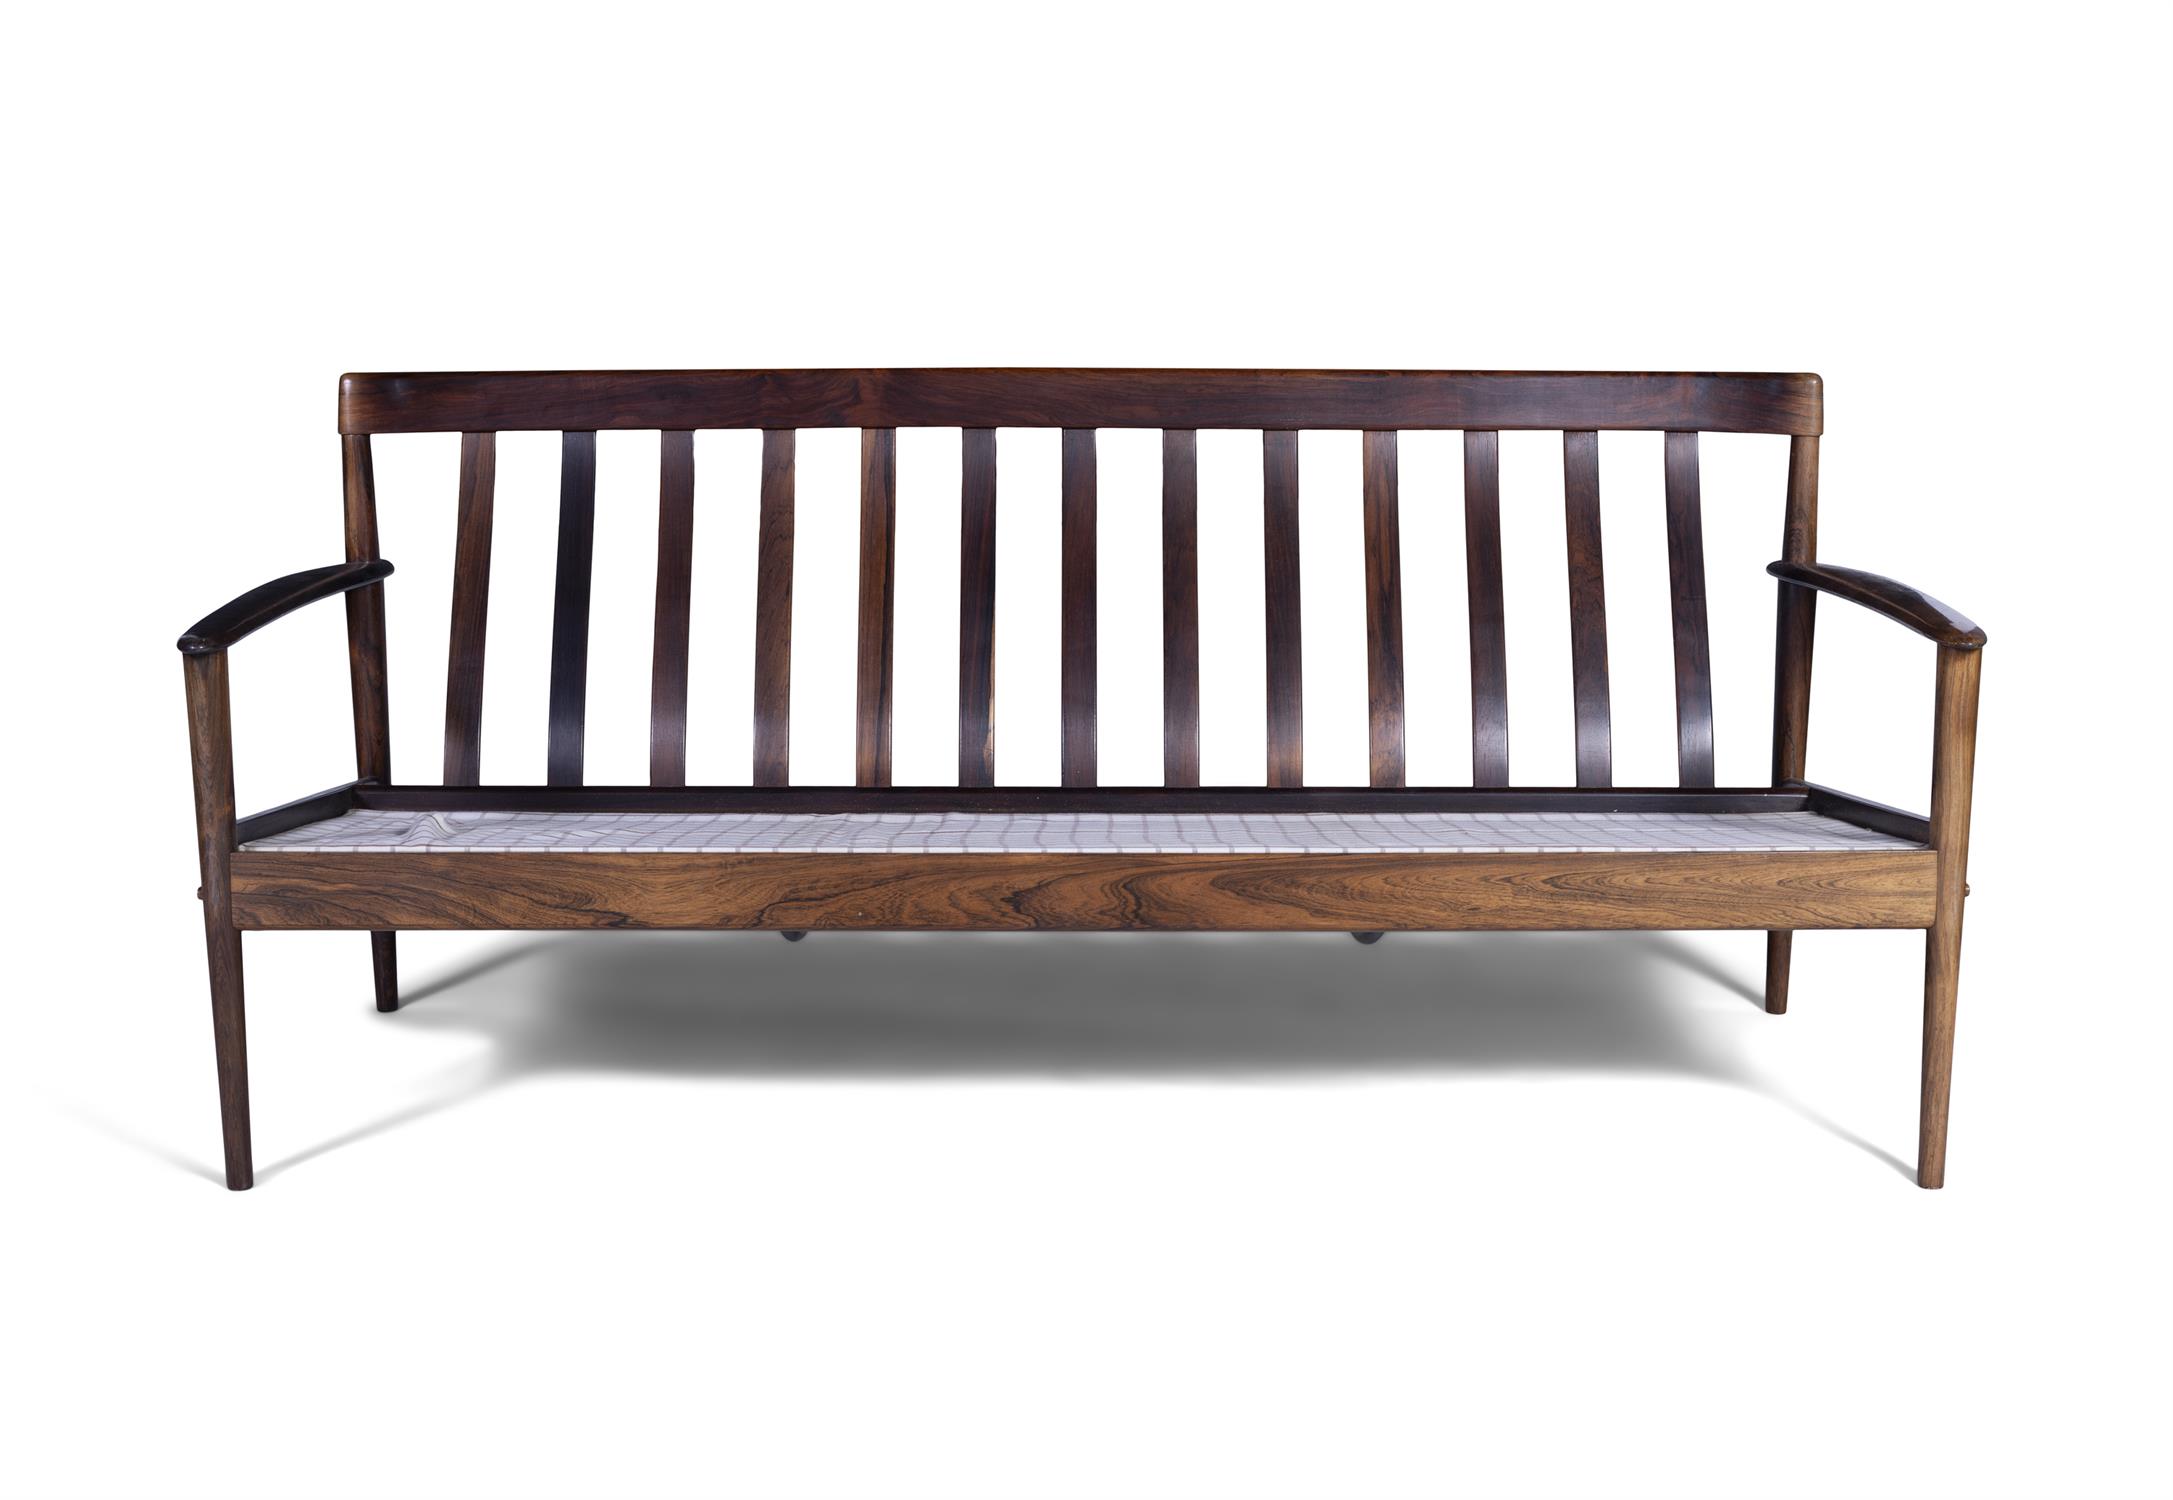 GRETE JALK (1920 - 2006) A rosewood three-seater sofa by Grete Jalk. Denmark, c. - Image 3 of 6